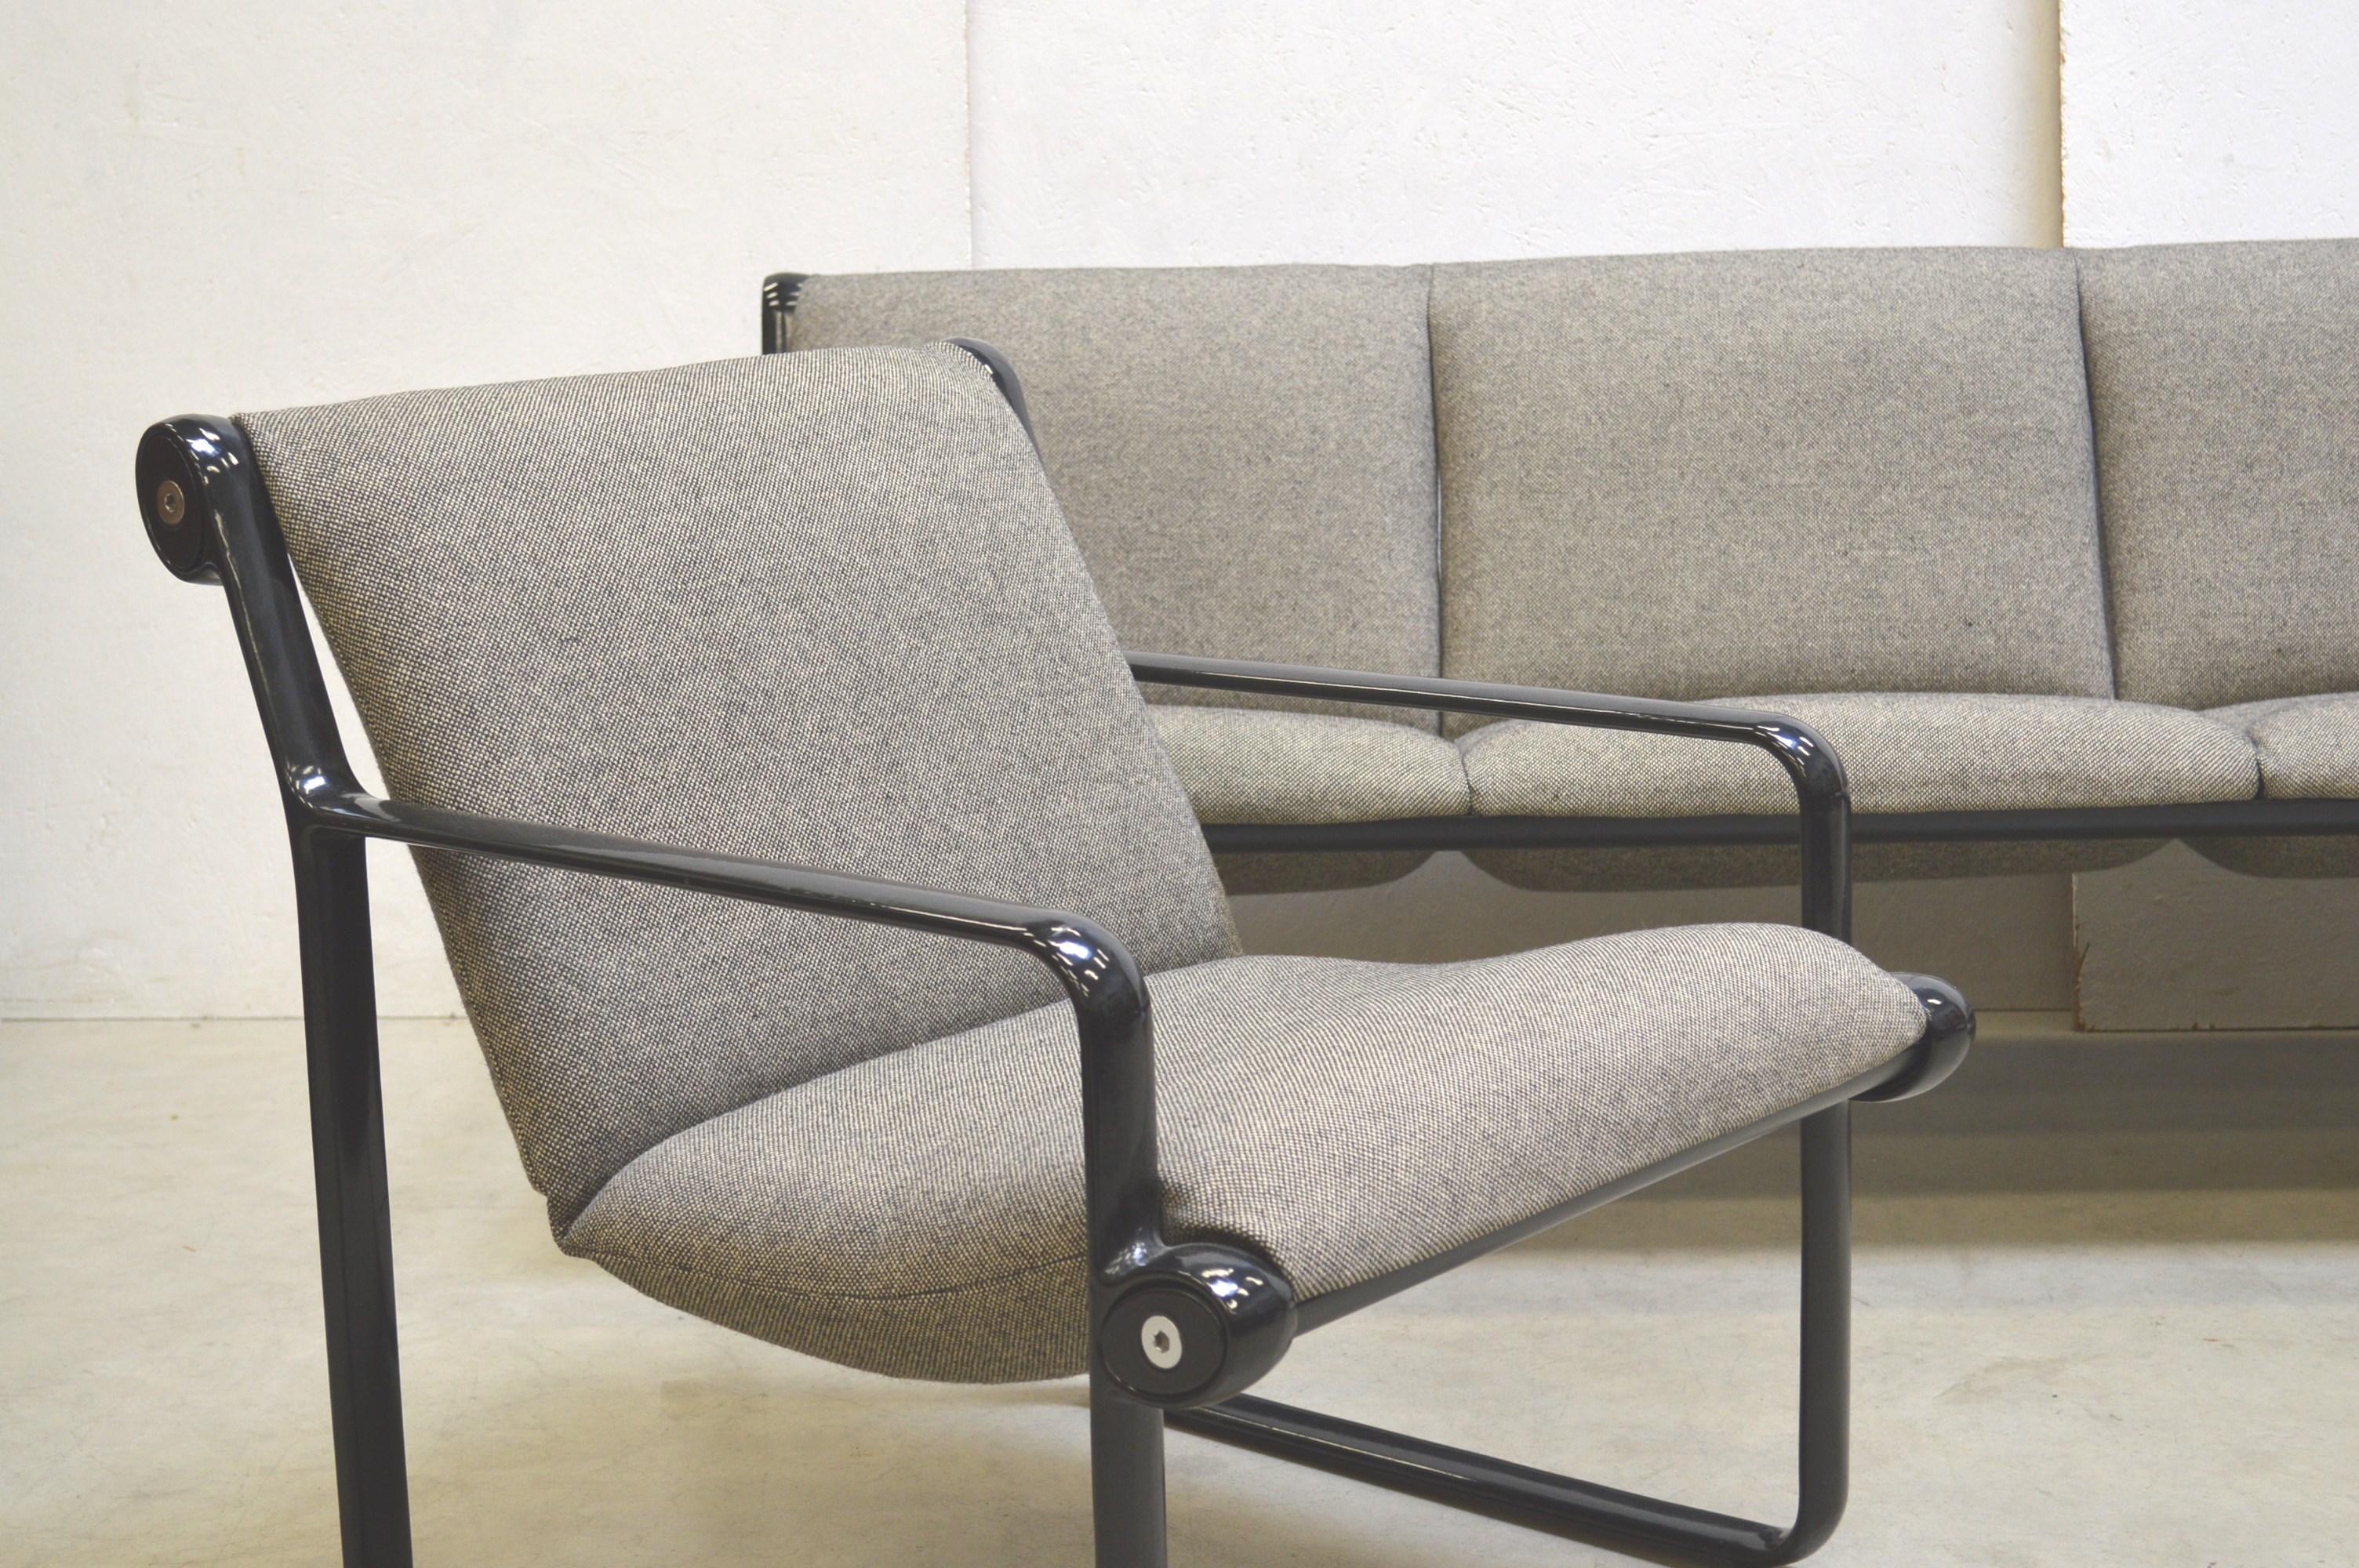 American Sofa & 2x Chairs Model Sling by Bruce Hannah & Andrew Morrison for Knoll 1970s